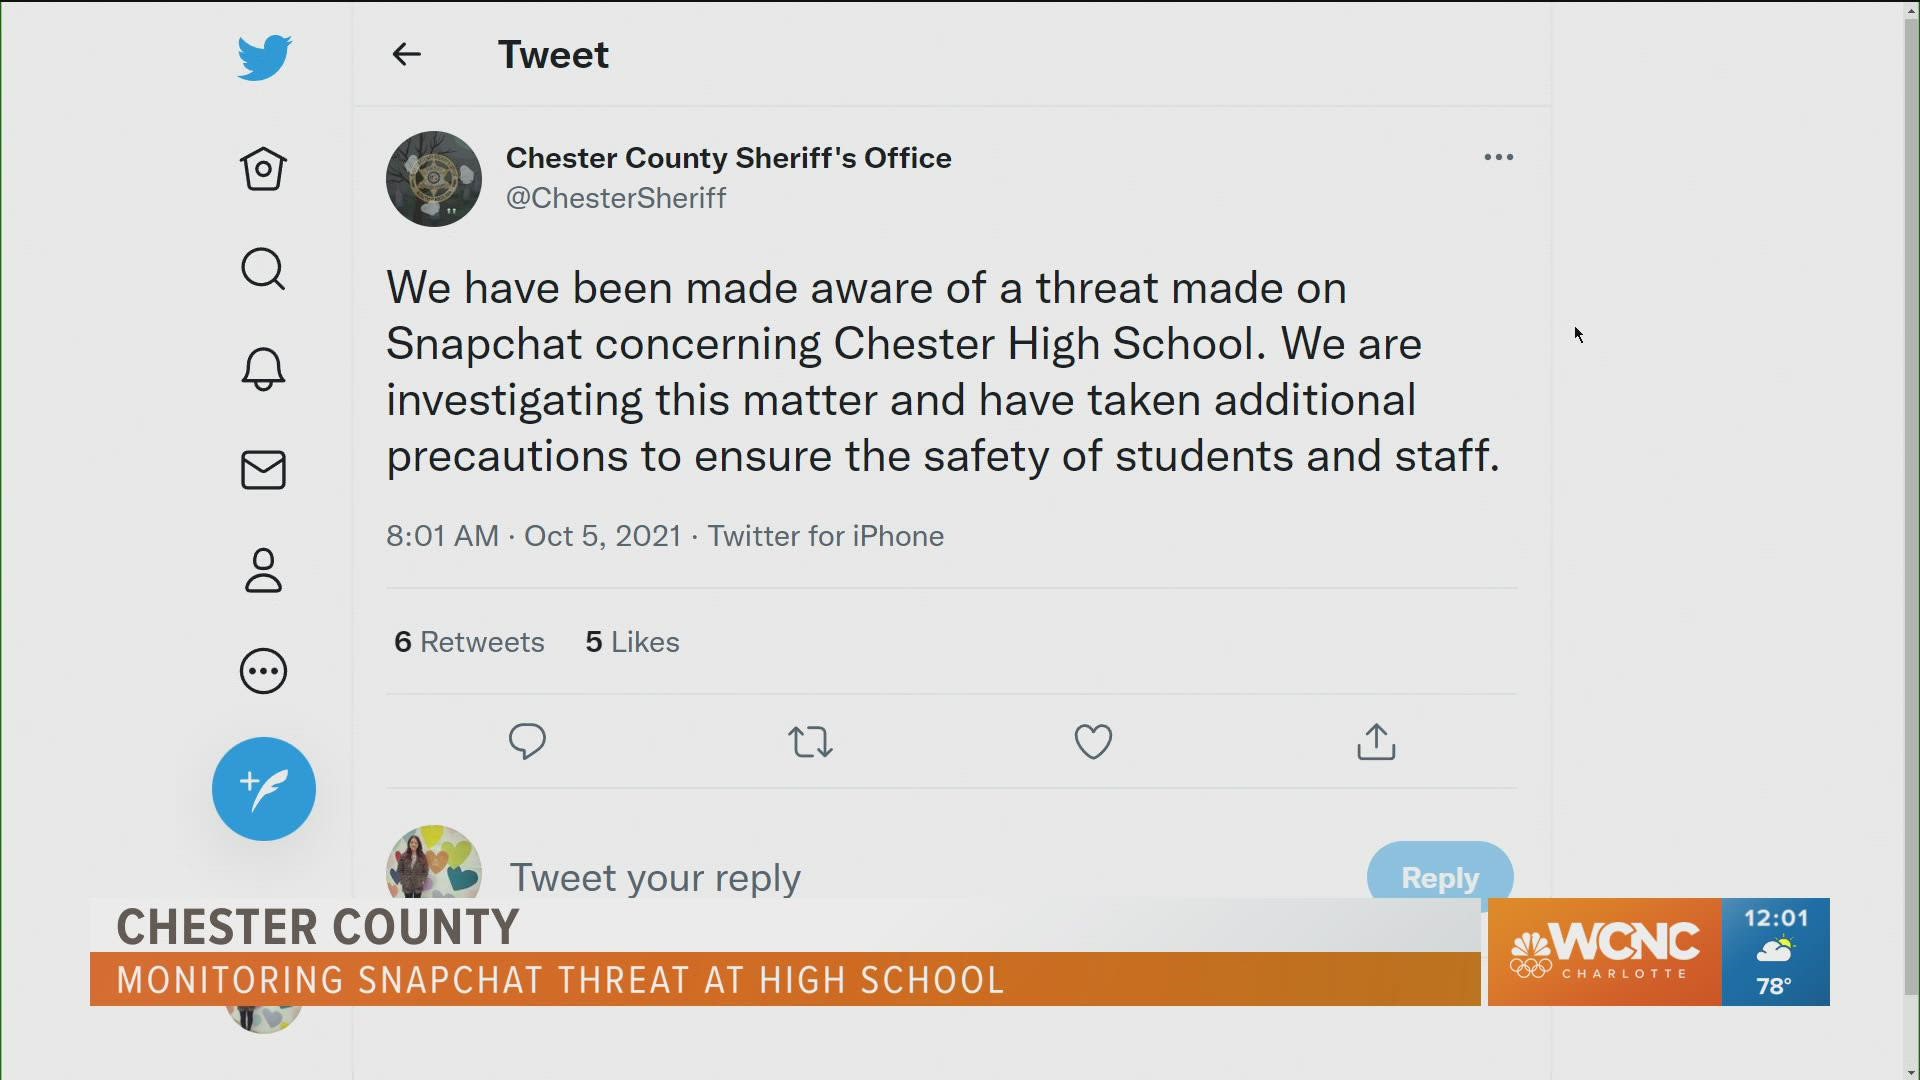 The Chester County Sheriff's Office said they are investigating a threat made on Snapchat concerning the school. No further details were given.